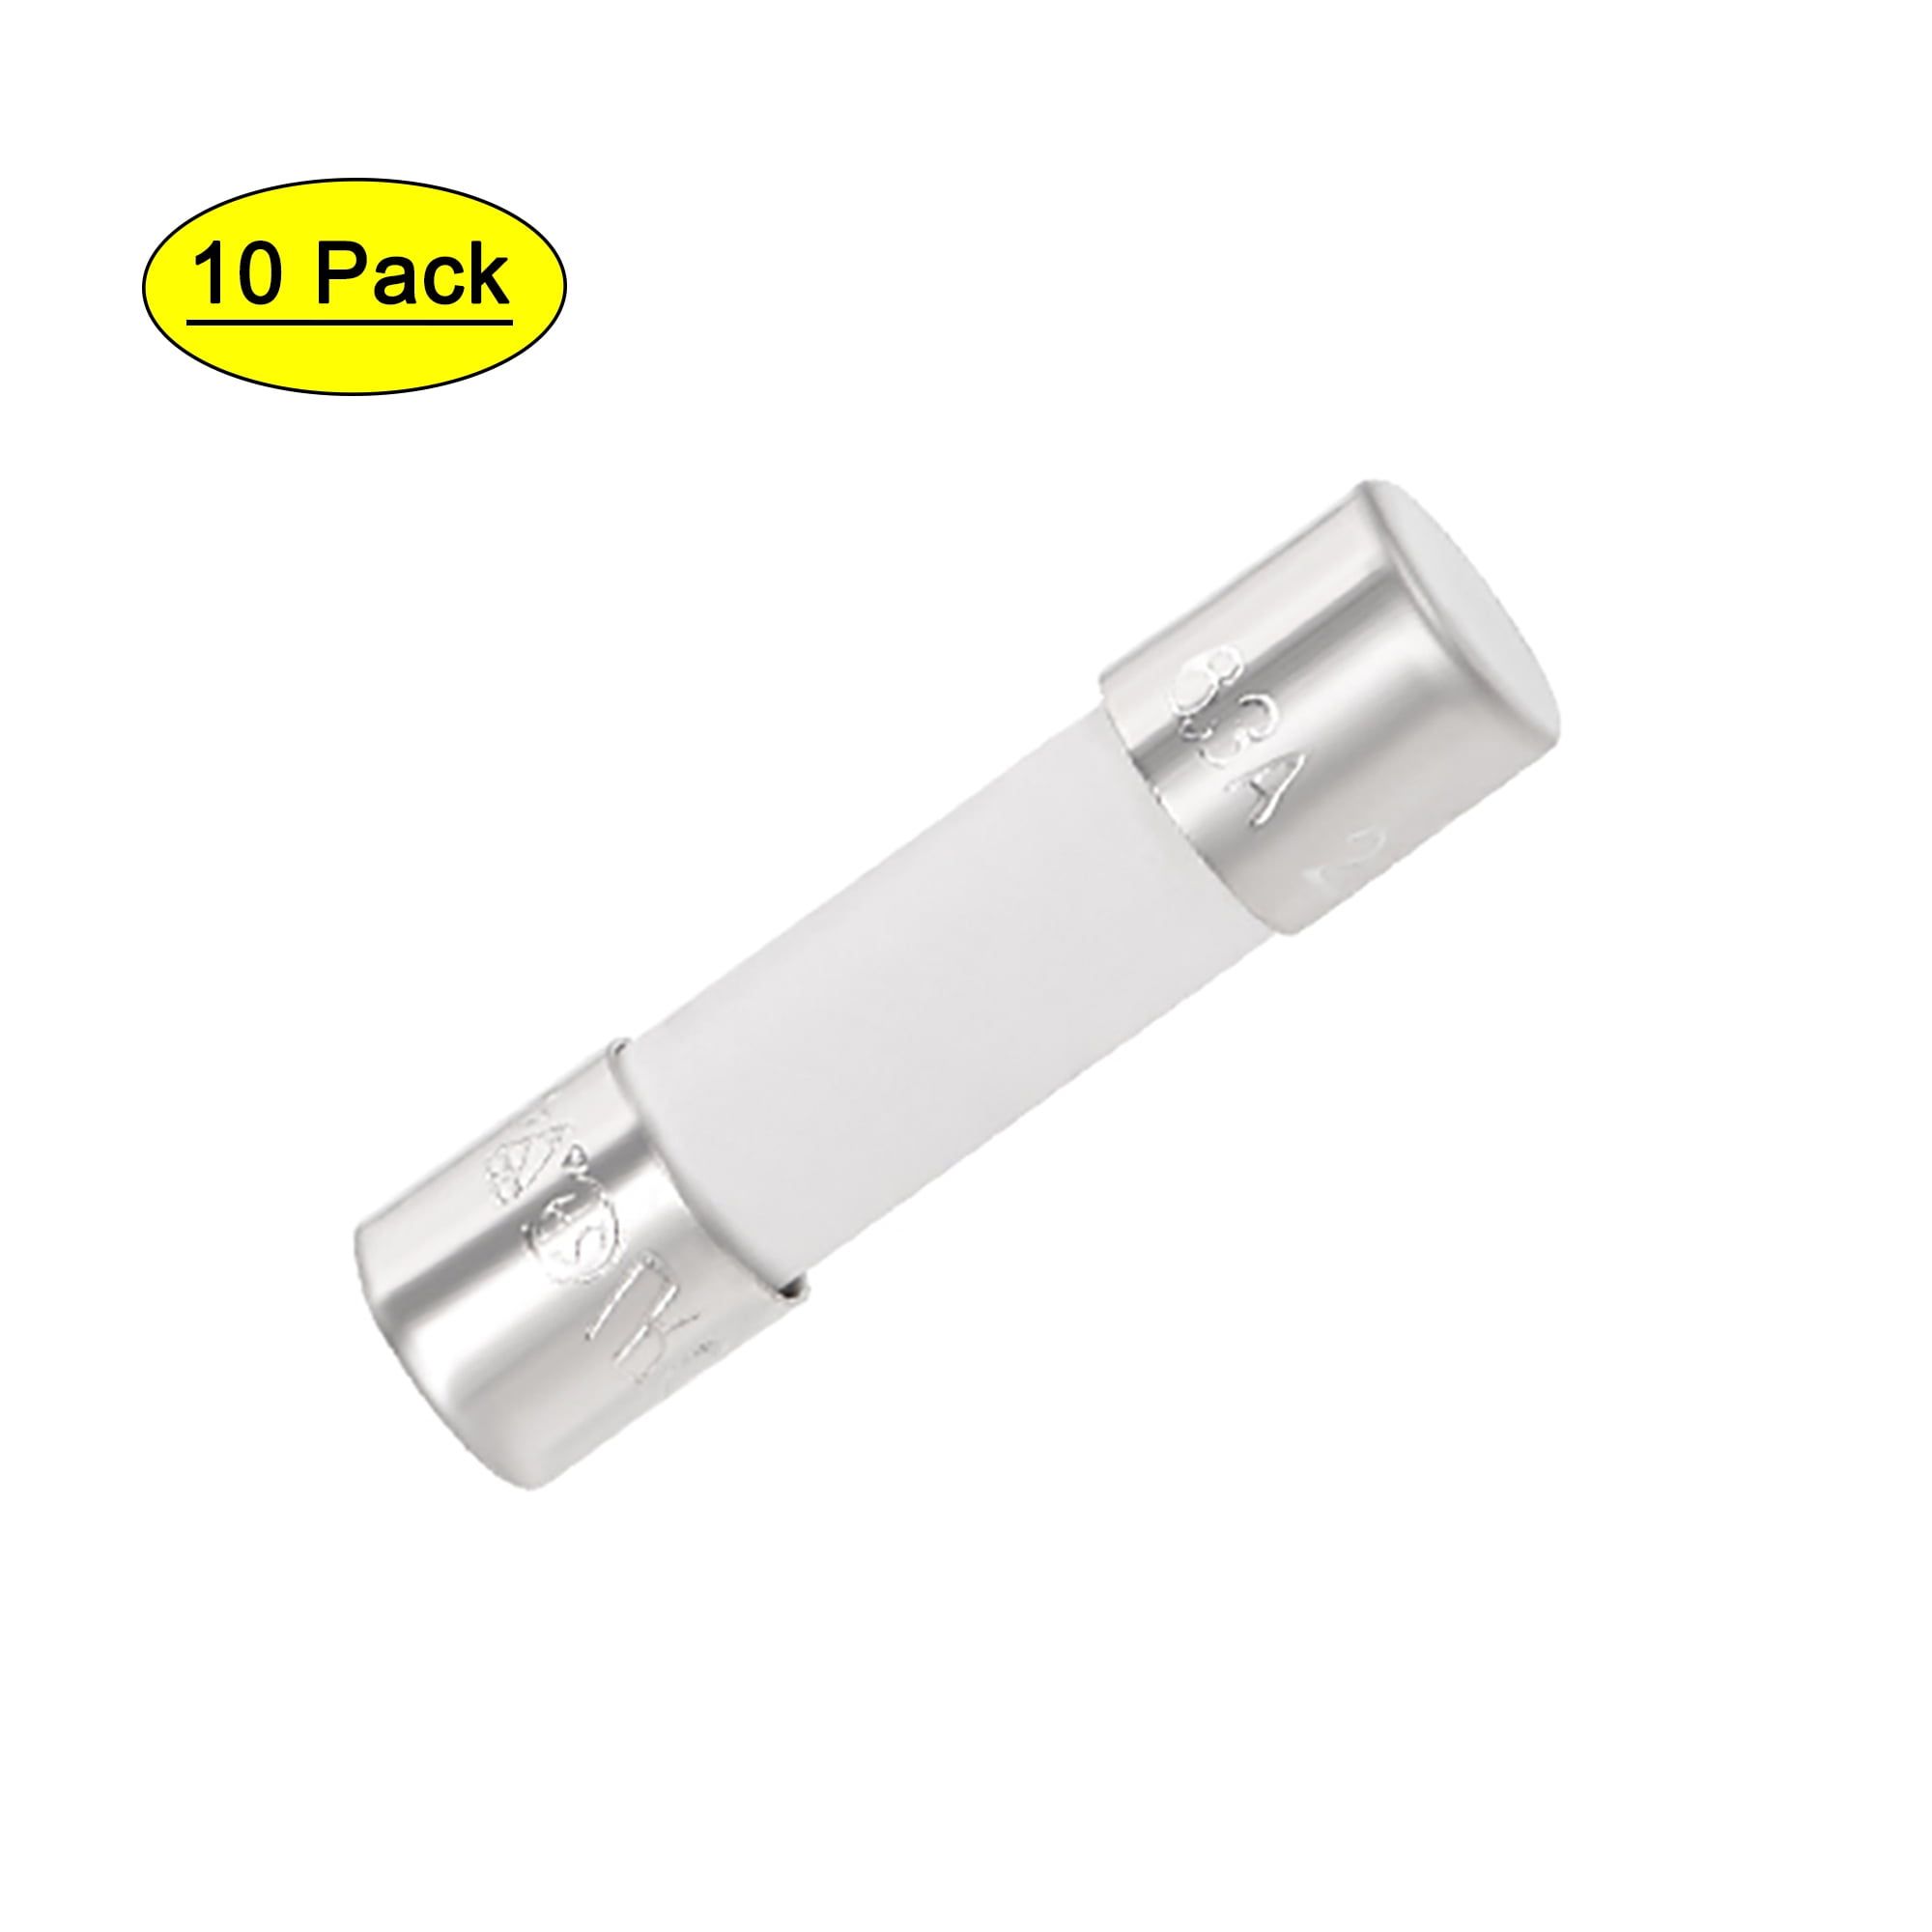 10 x 6.3A 20mm Ceramic Time Delay Slow Blow Fuse 